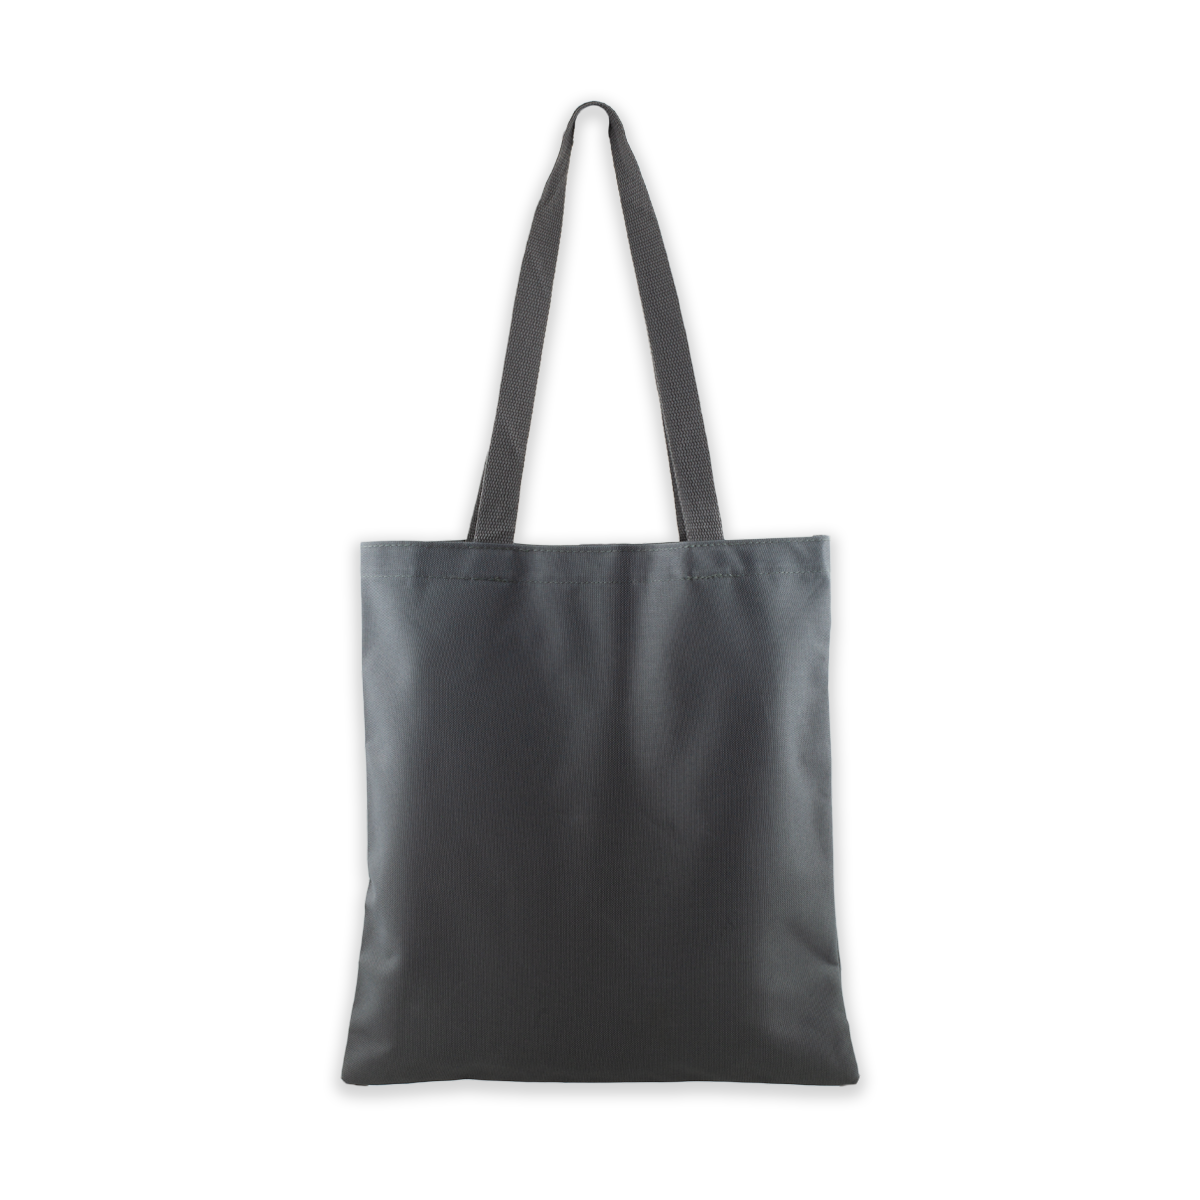 Mental Health First Aid Tote